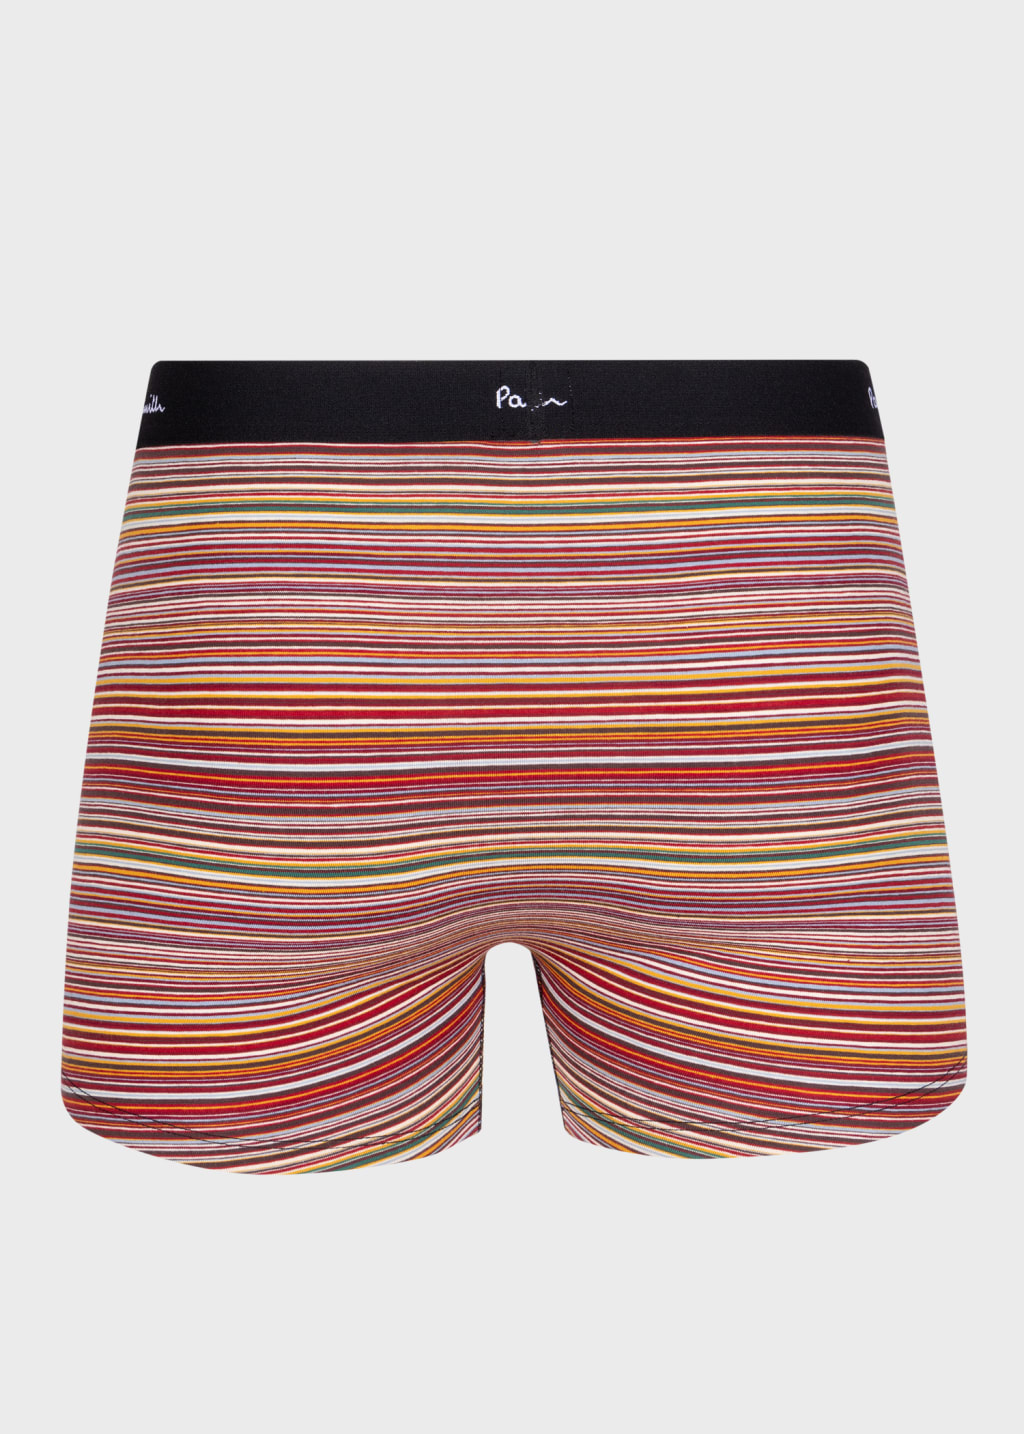 Product view - Signature Stripe And Plain Boxer Shorts Three Pack